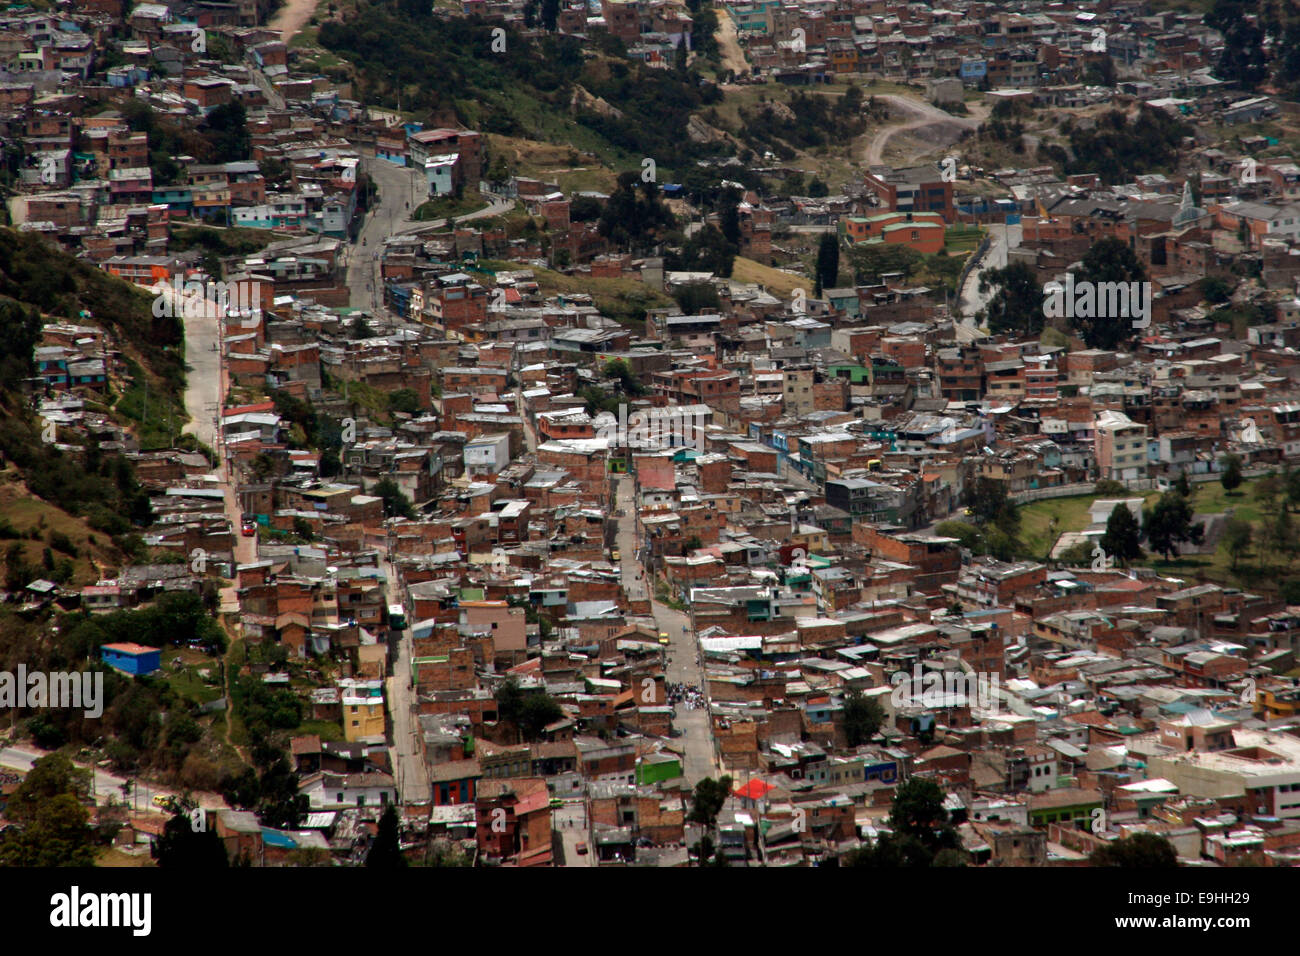 Shantytown on the edge of Bogota, Colombia Stock Photo